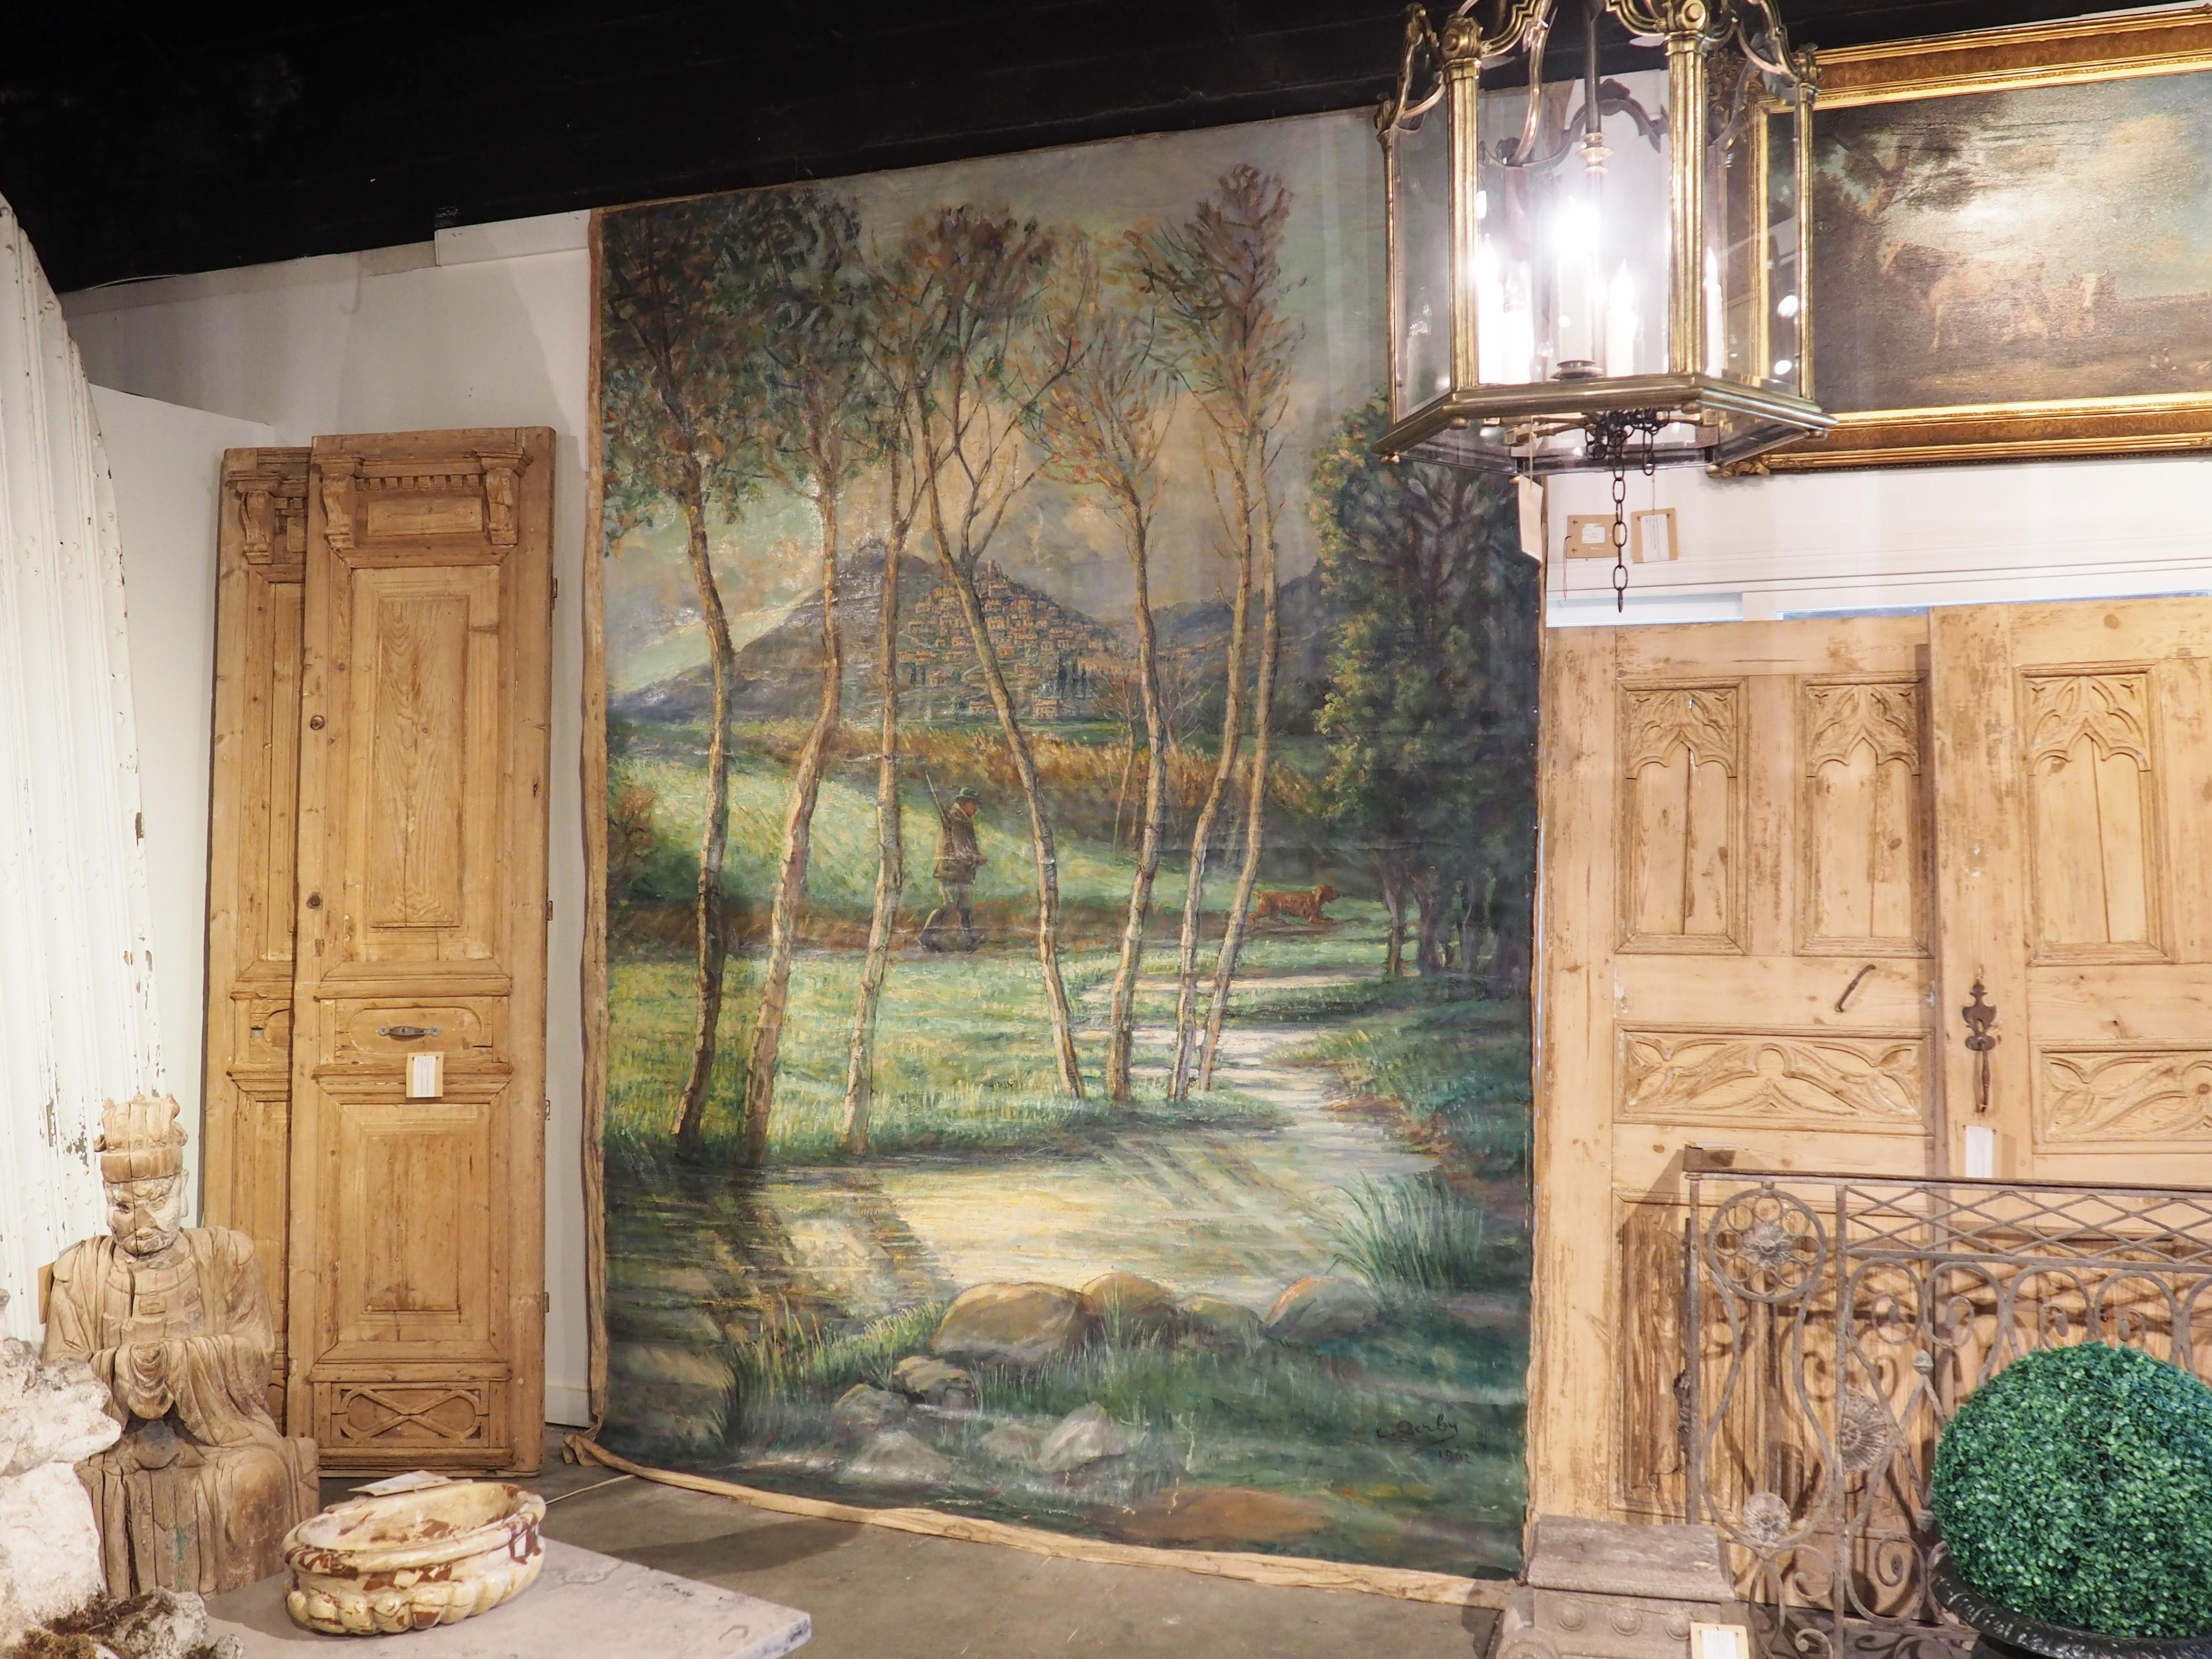 Purchased from a chateau in the South of France, this large landscape painting of a hunter walking outside of a hillside village is over 10 feet tall and seven feet wide. The canvas is signed and dated in the lower right-hand corner, indicating that